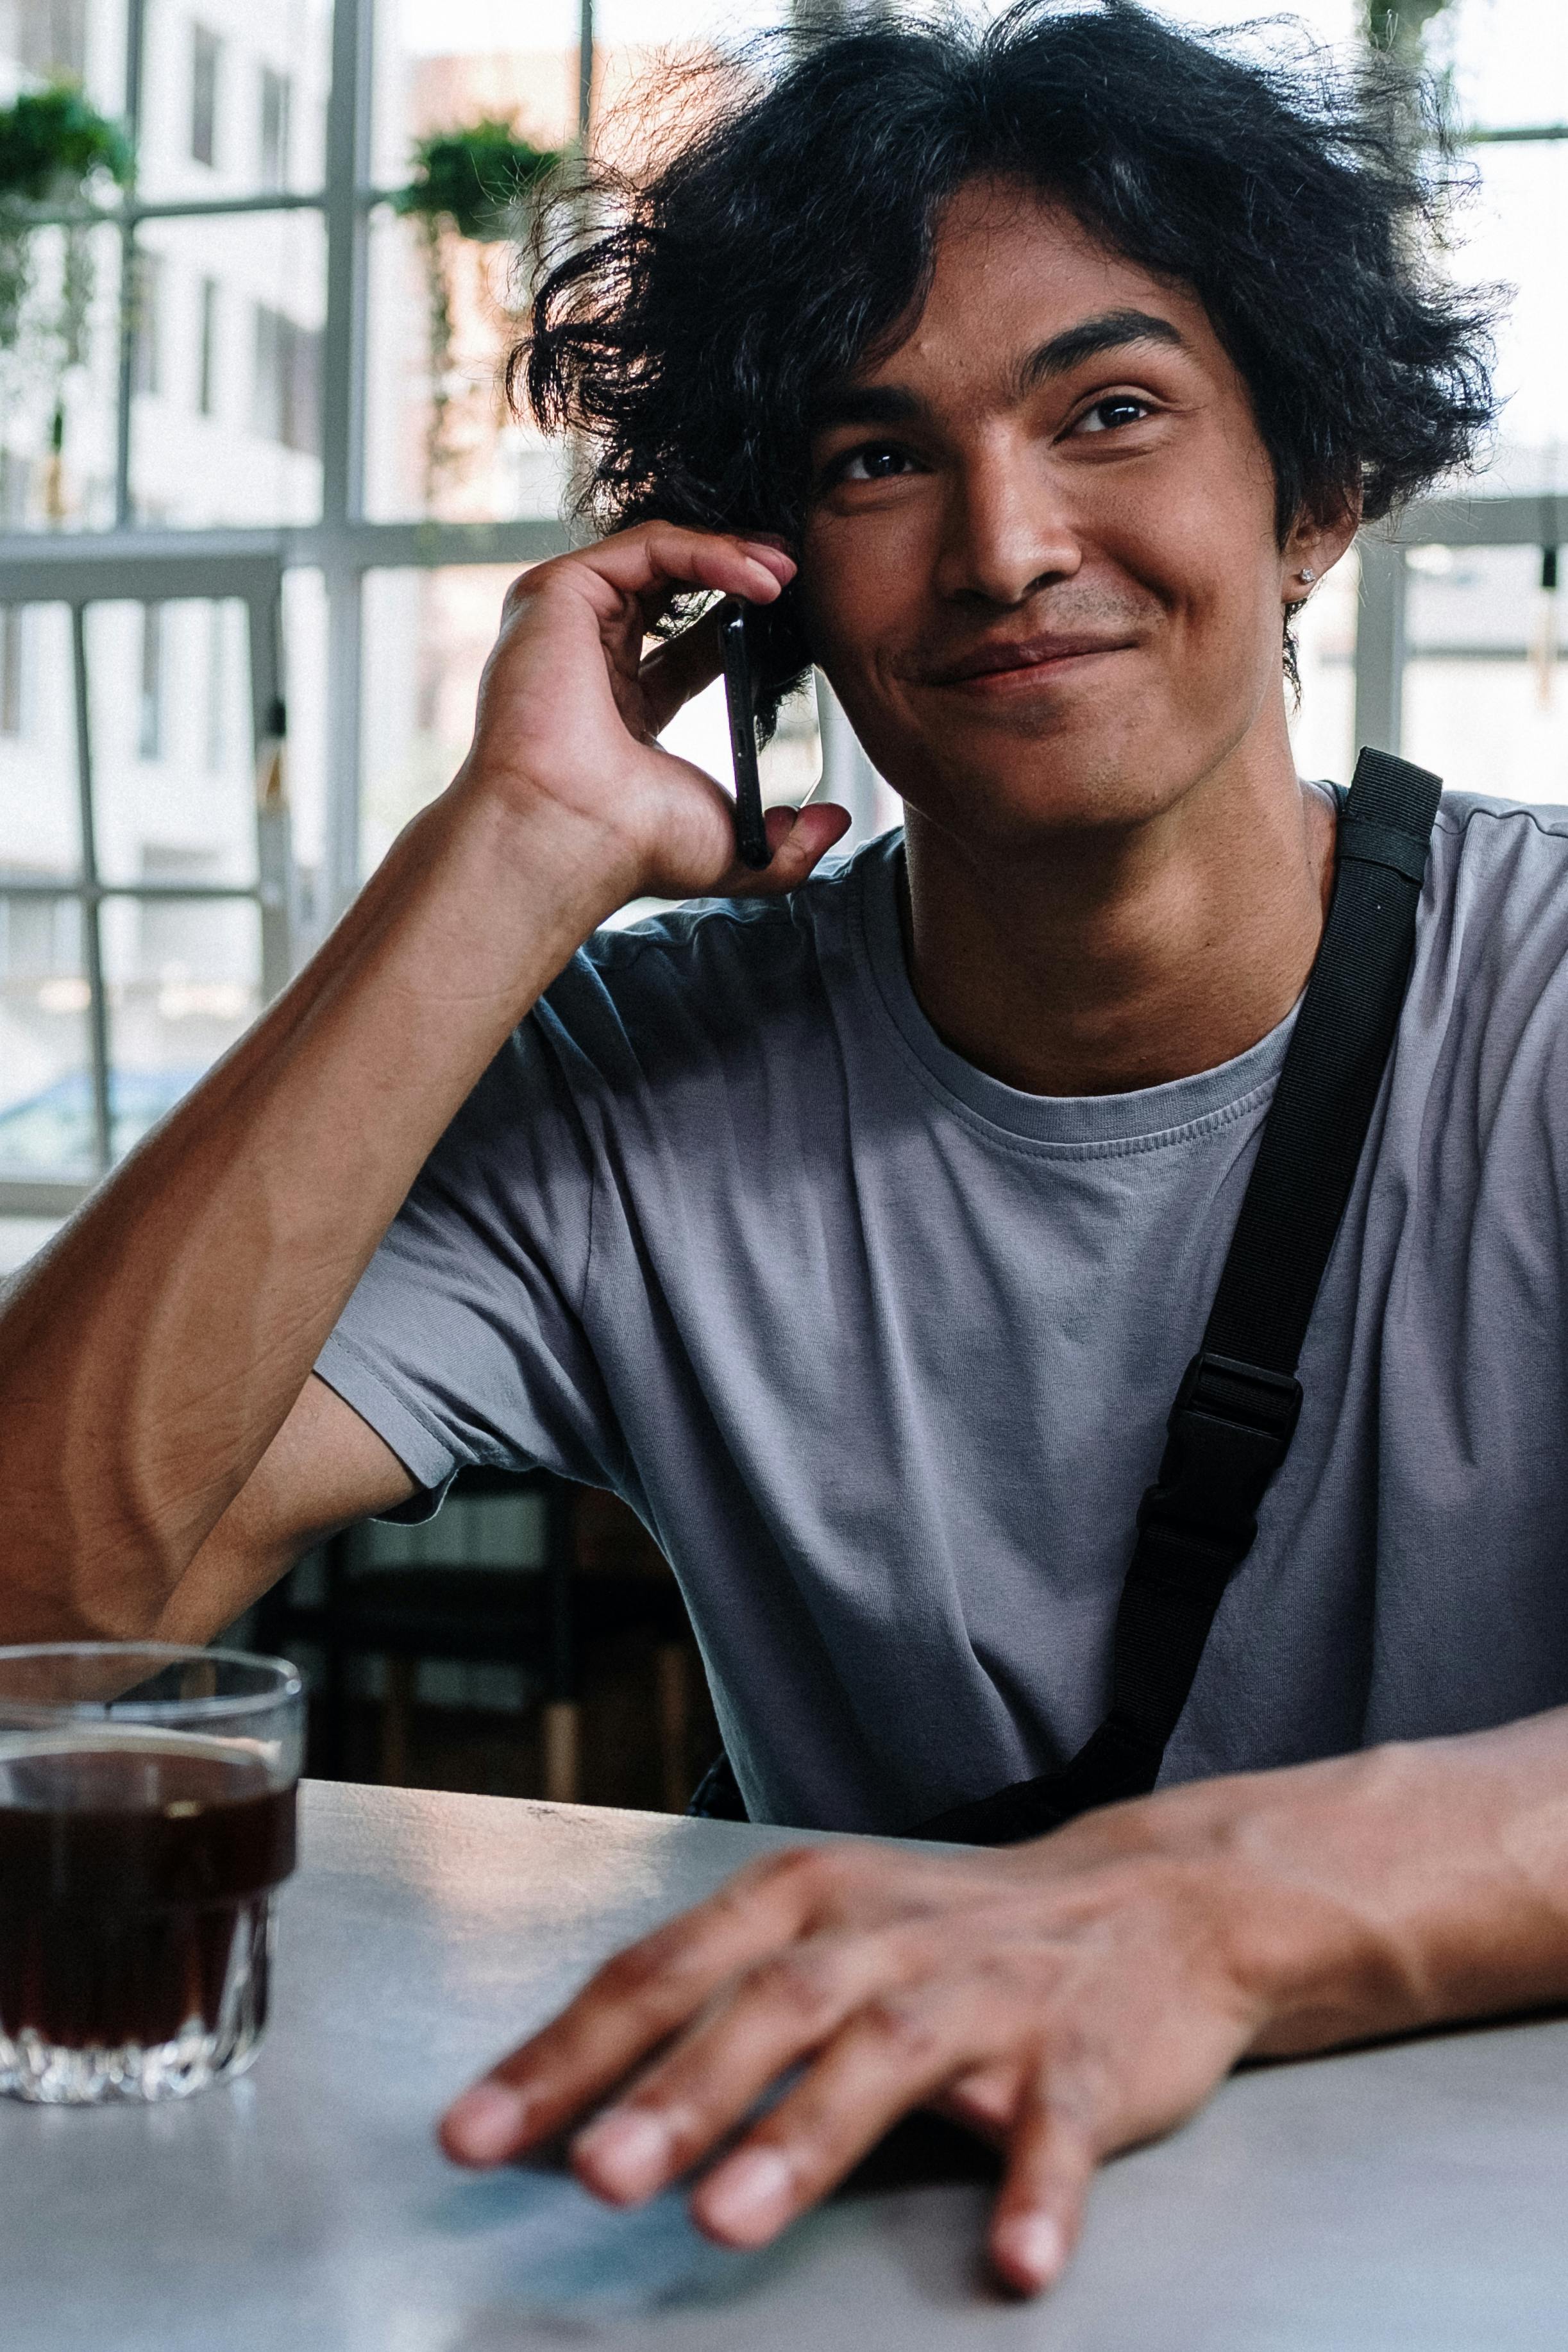 A happy man talking on the phone while having a drink | Source: Pexels